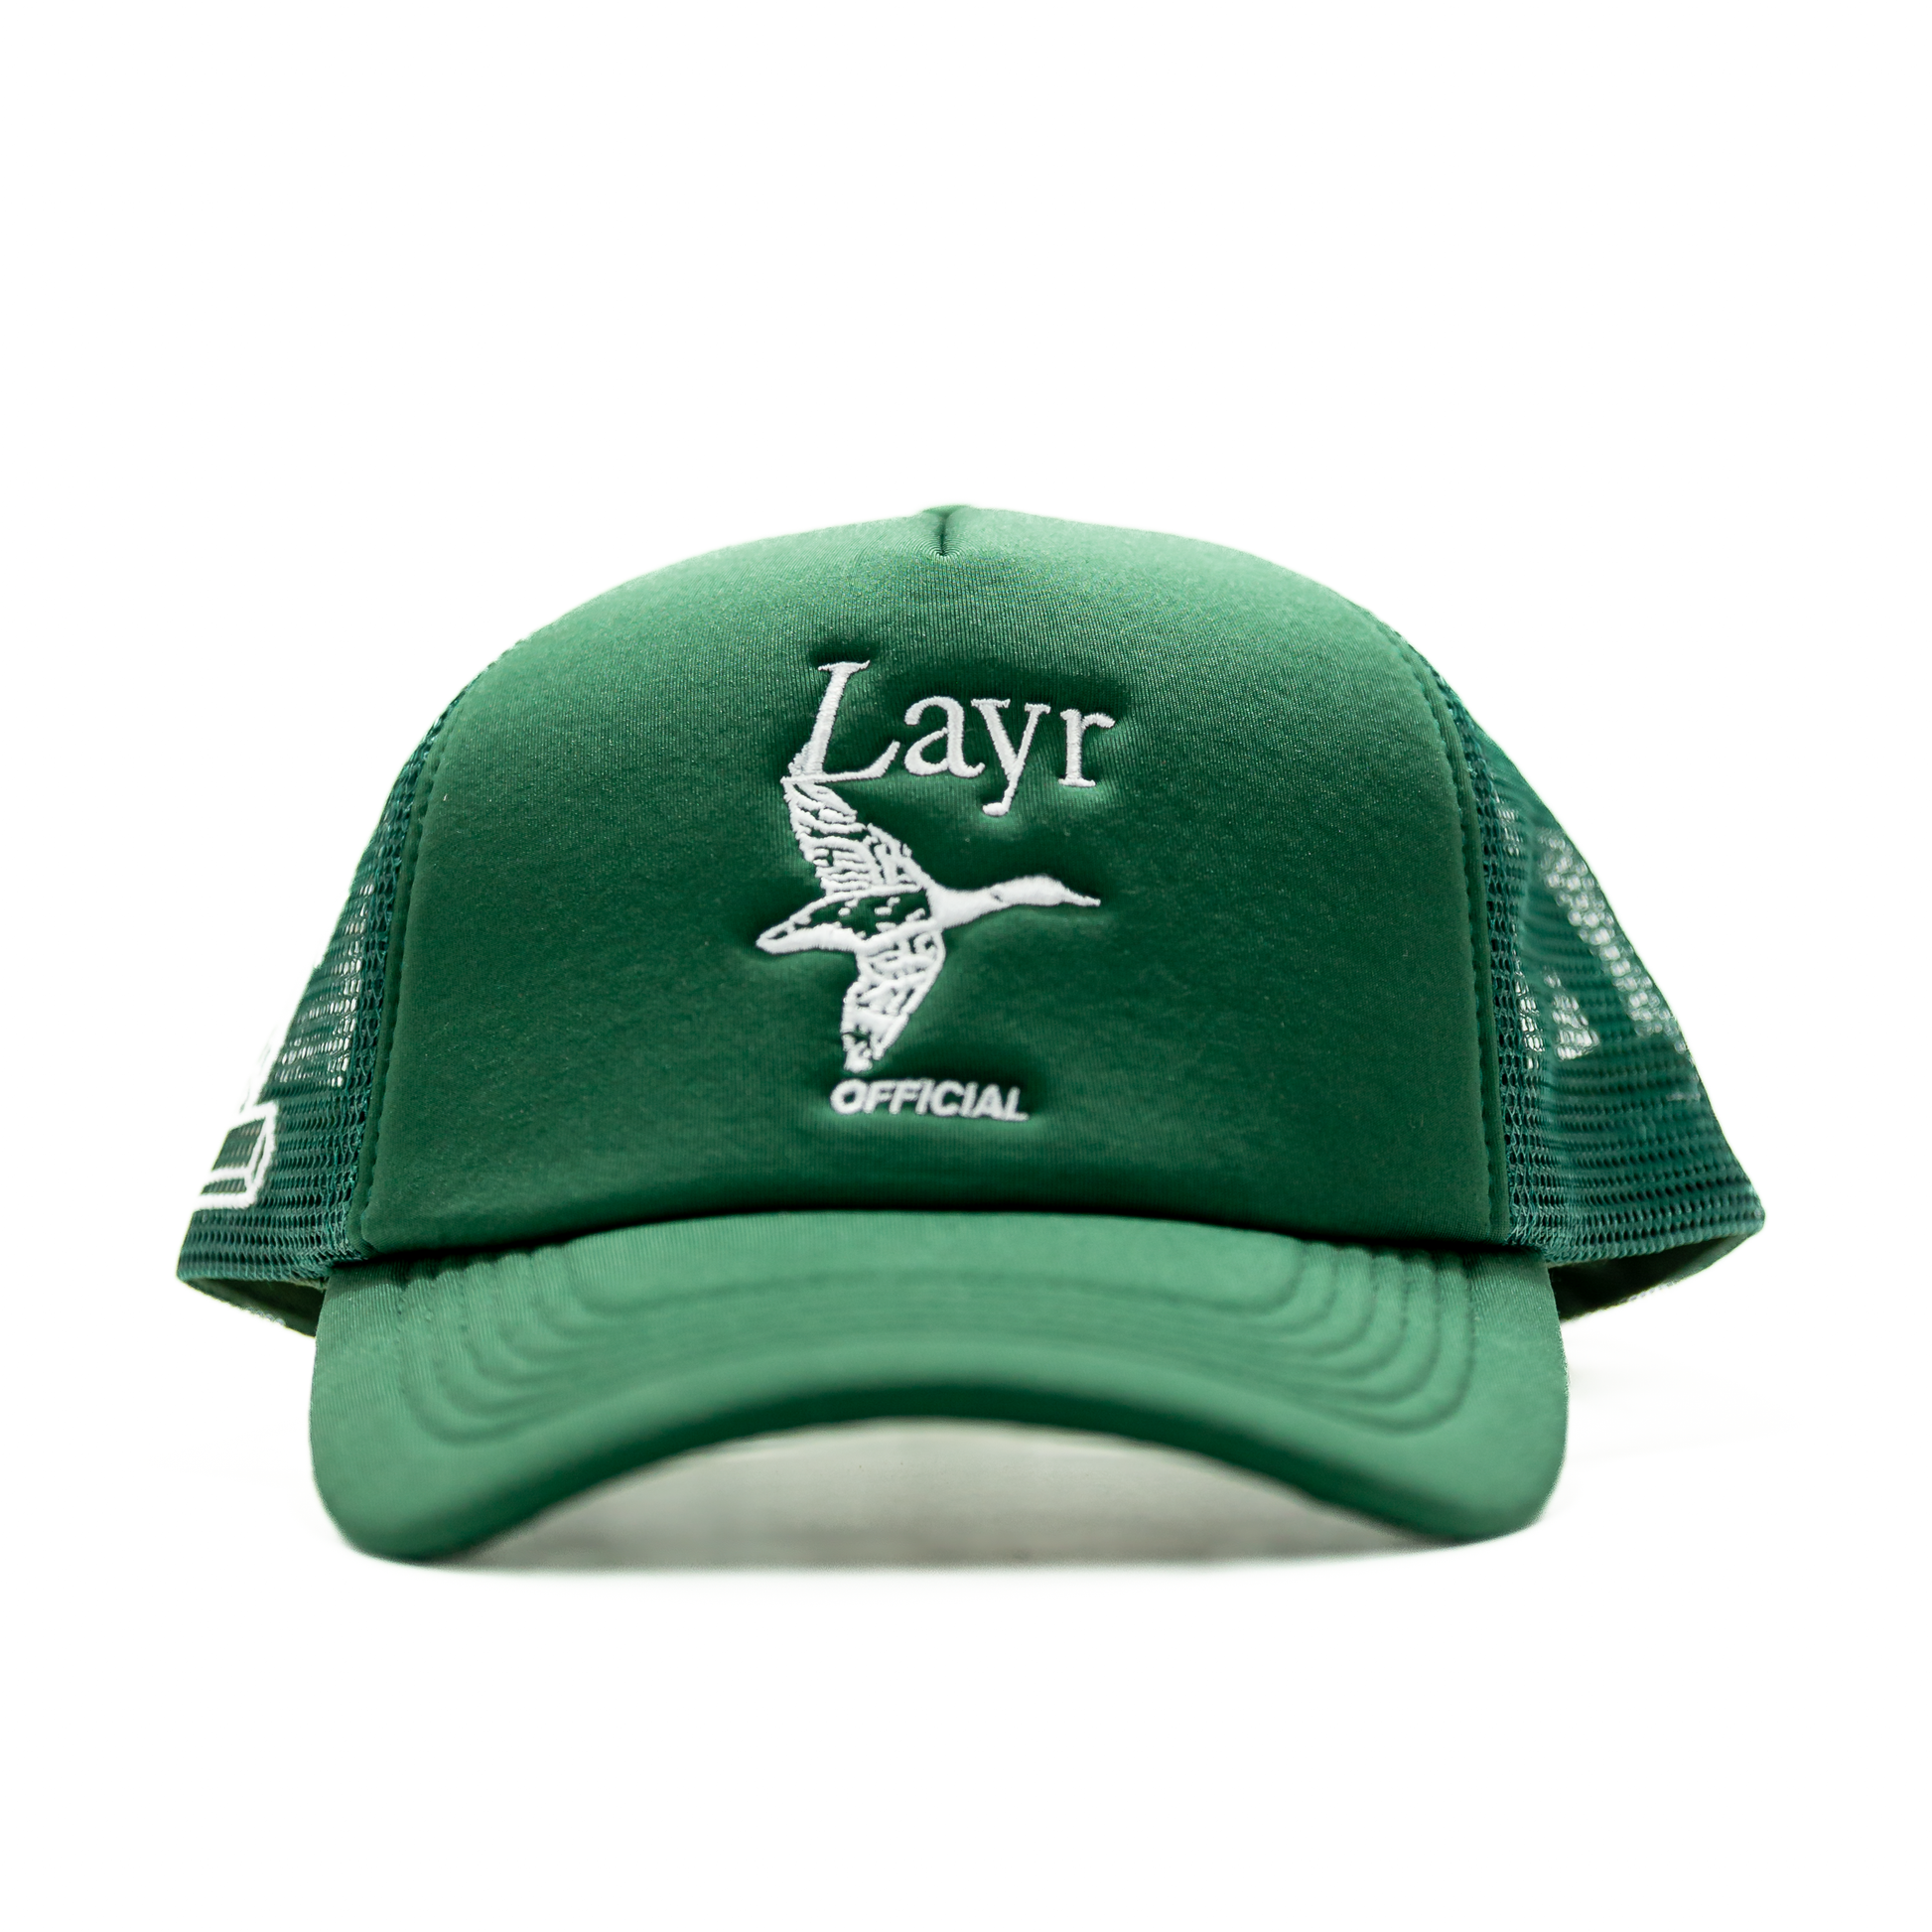 Flying Duck Trucker Hat, Green / White - Layr Official